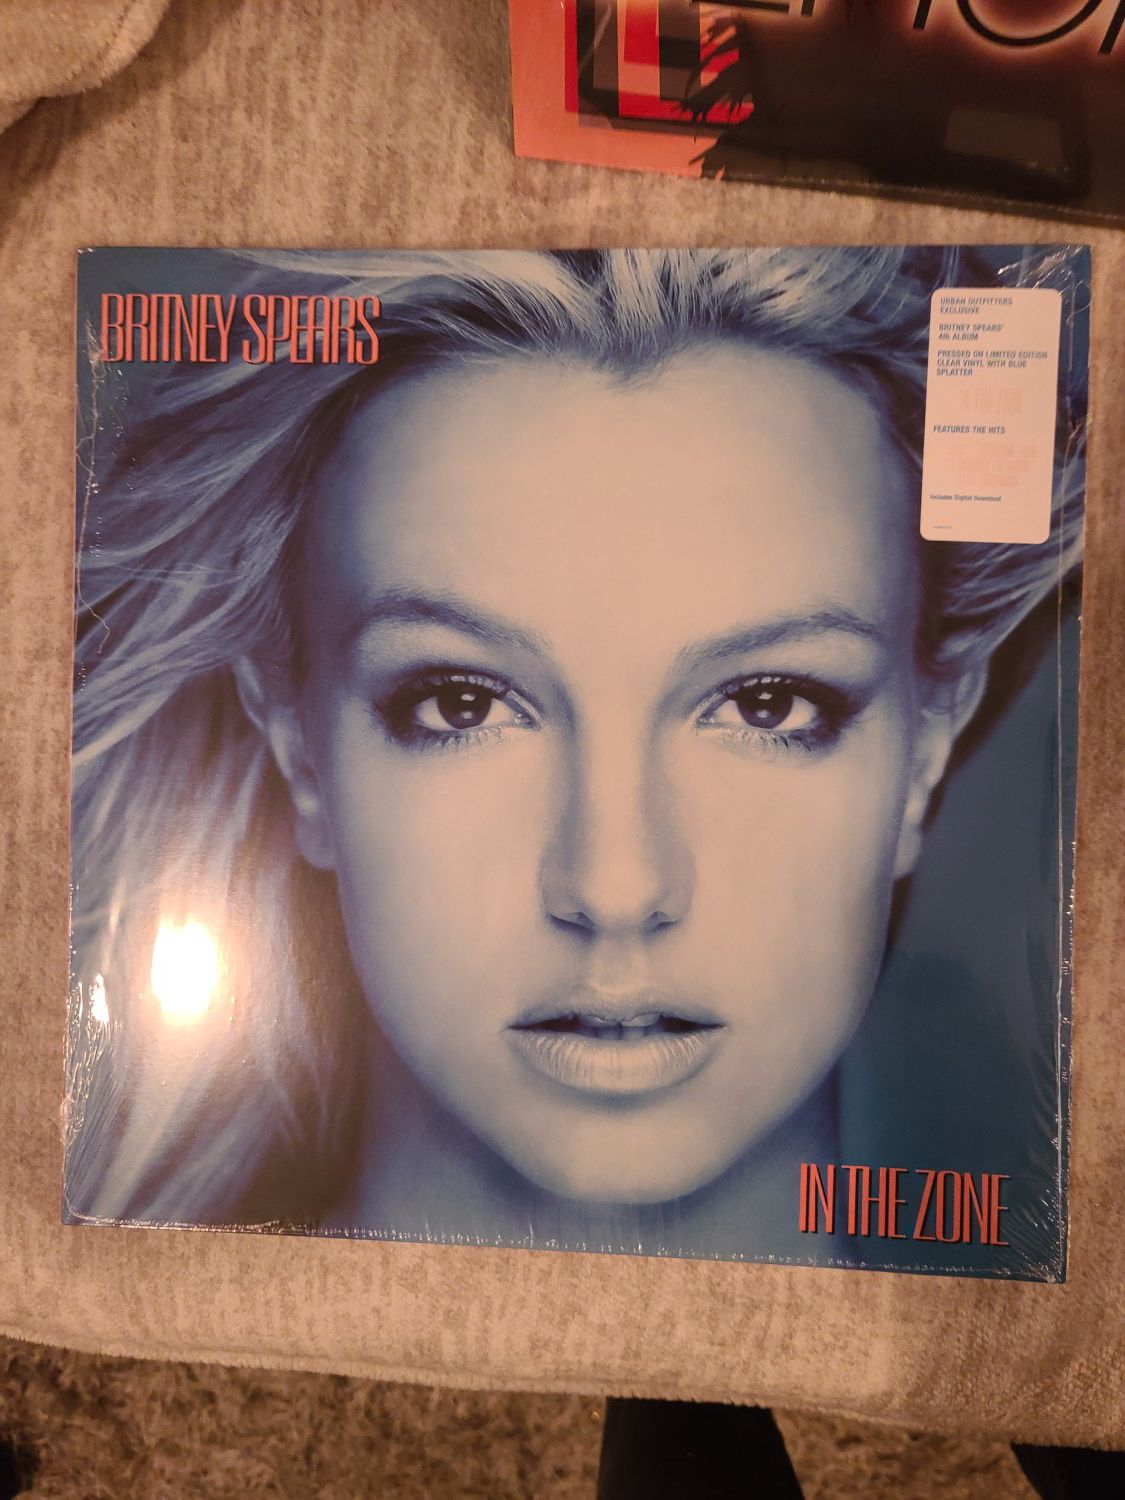 Britney spears limited edition vinyl in the zone